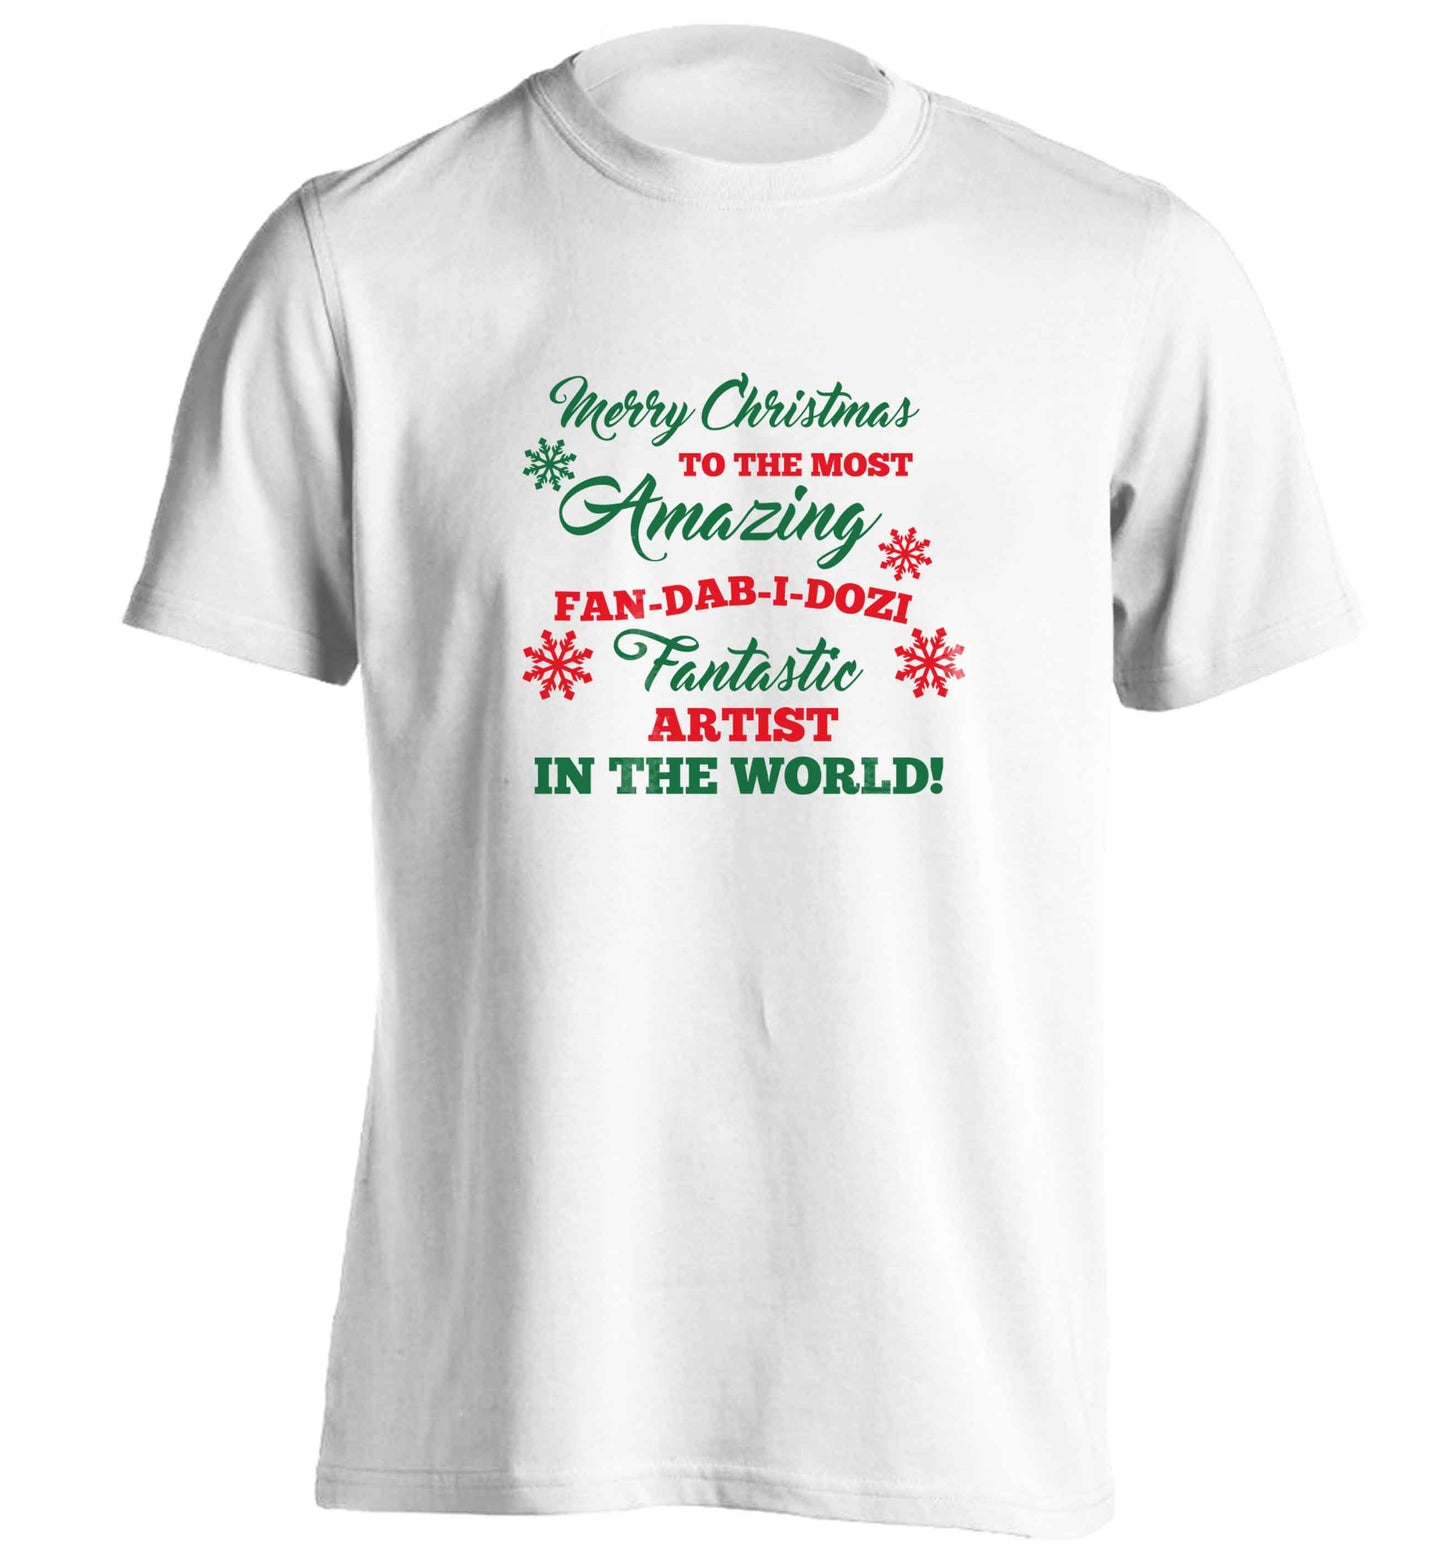 Merry Christmas to the most amazing artist in the world! adults unisex white Tshirt 2XL